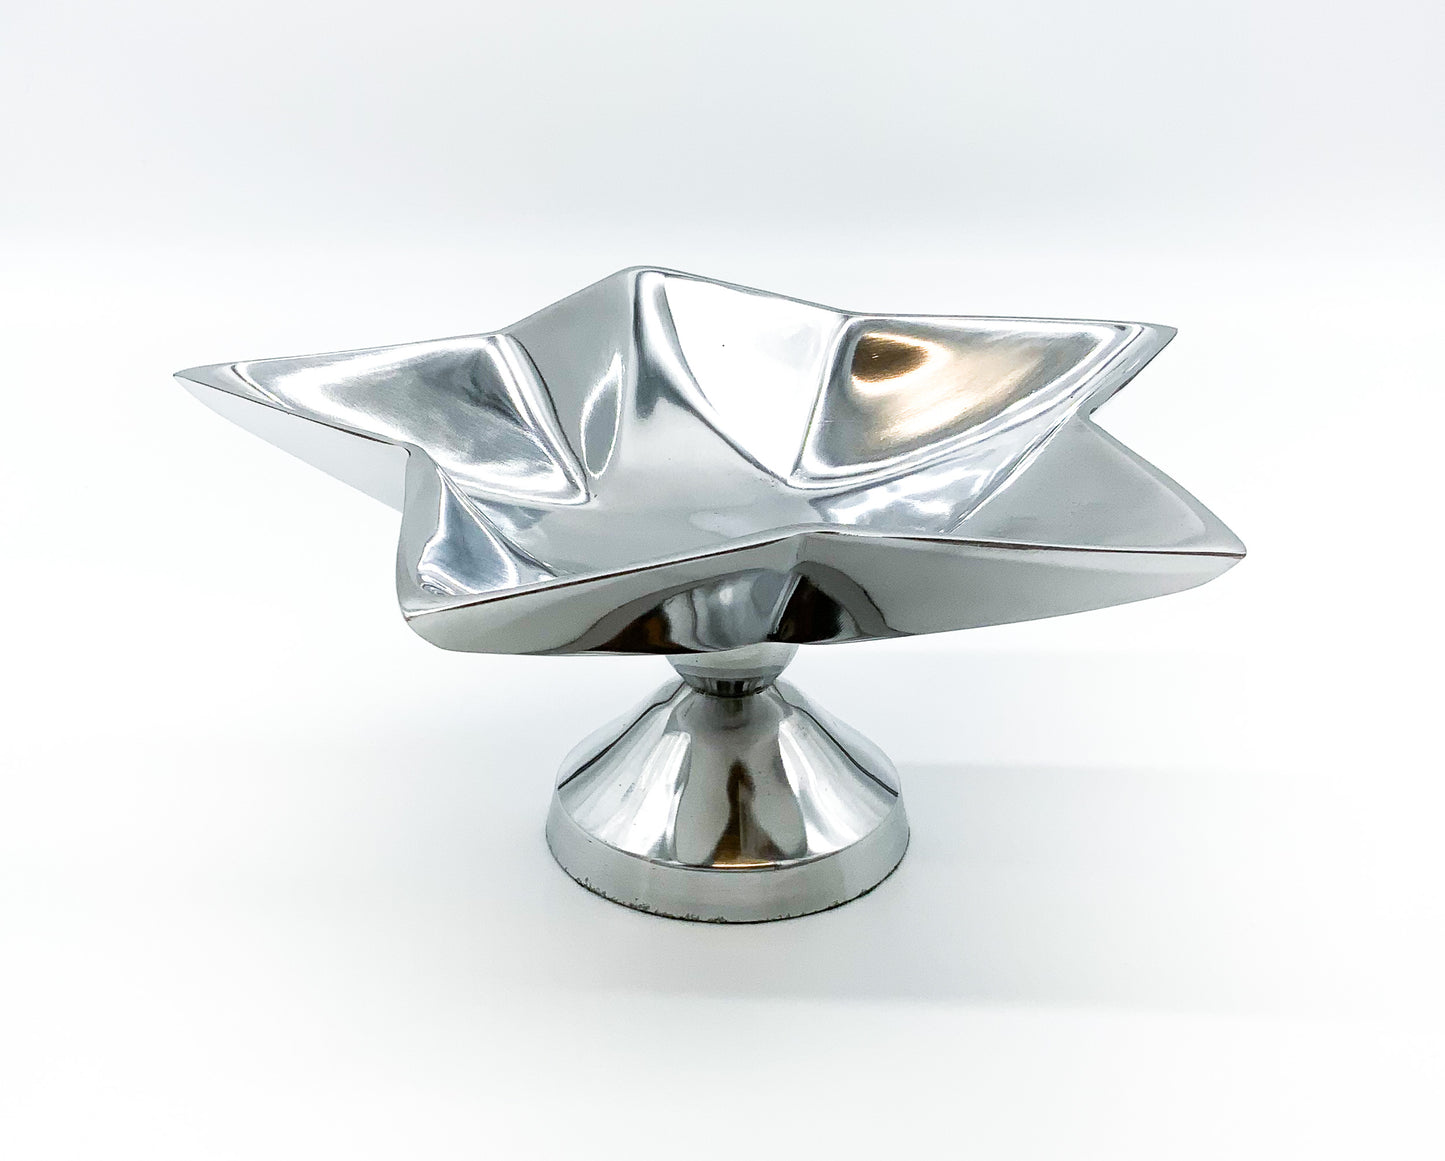 Footed Star Bowl